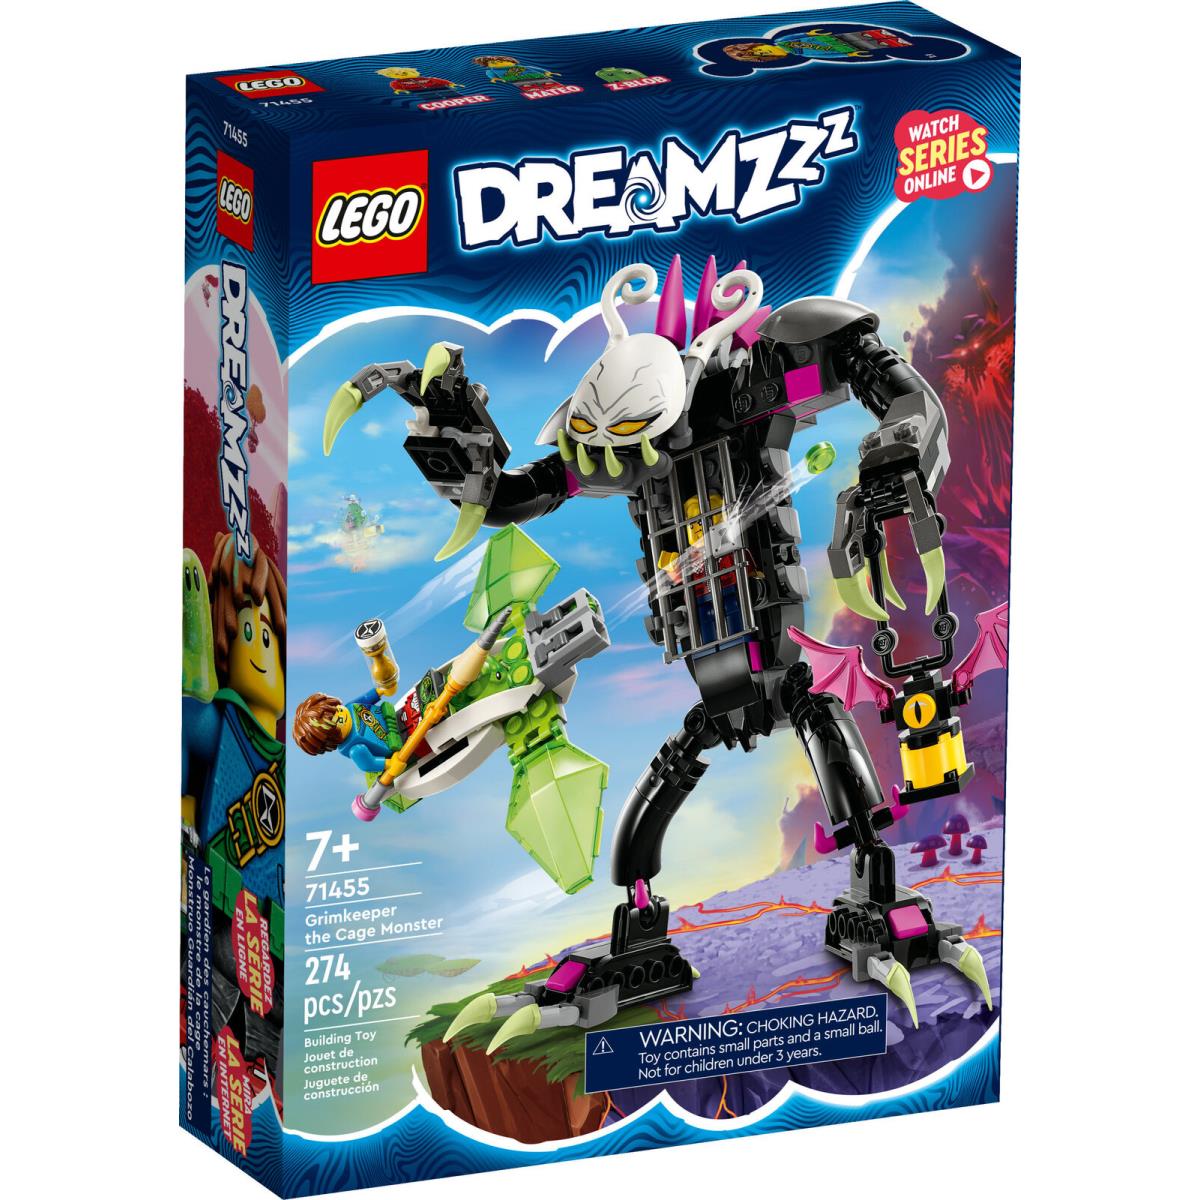 Lego Dreamzzz Grimkeeper The Cage Monster 71455 Building Toy Set Gift